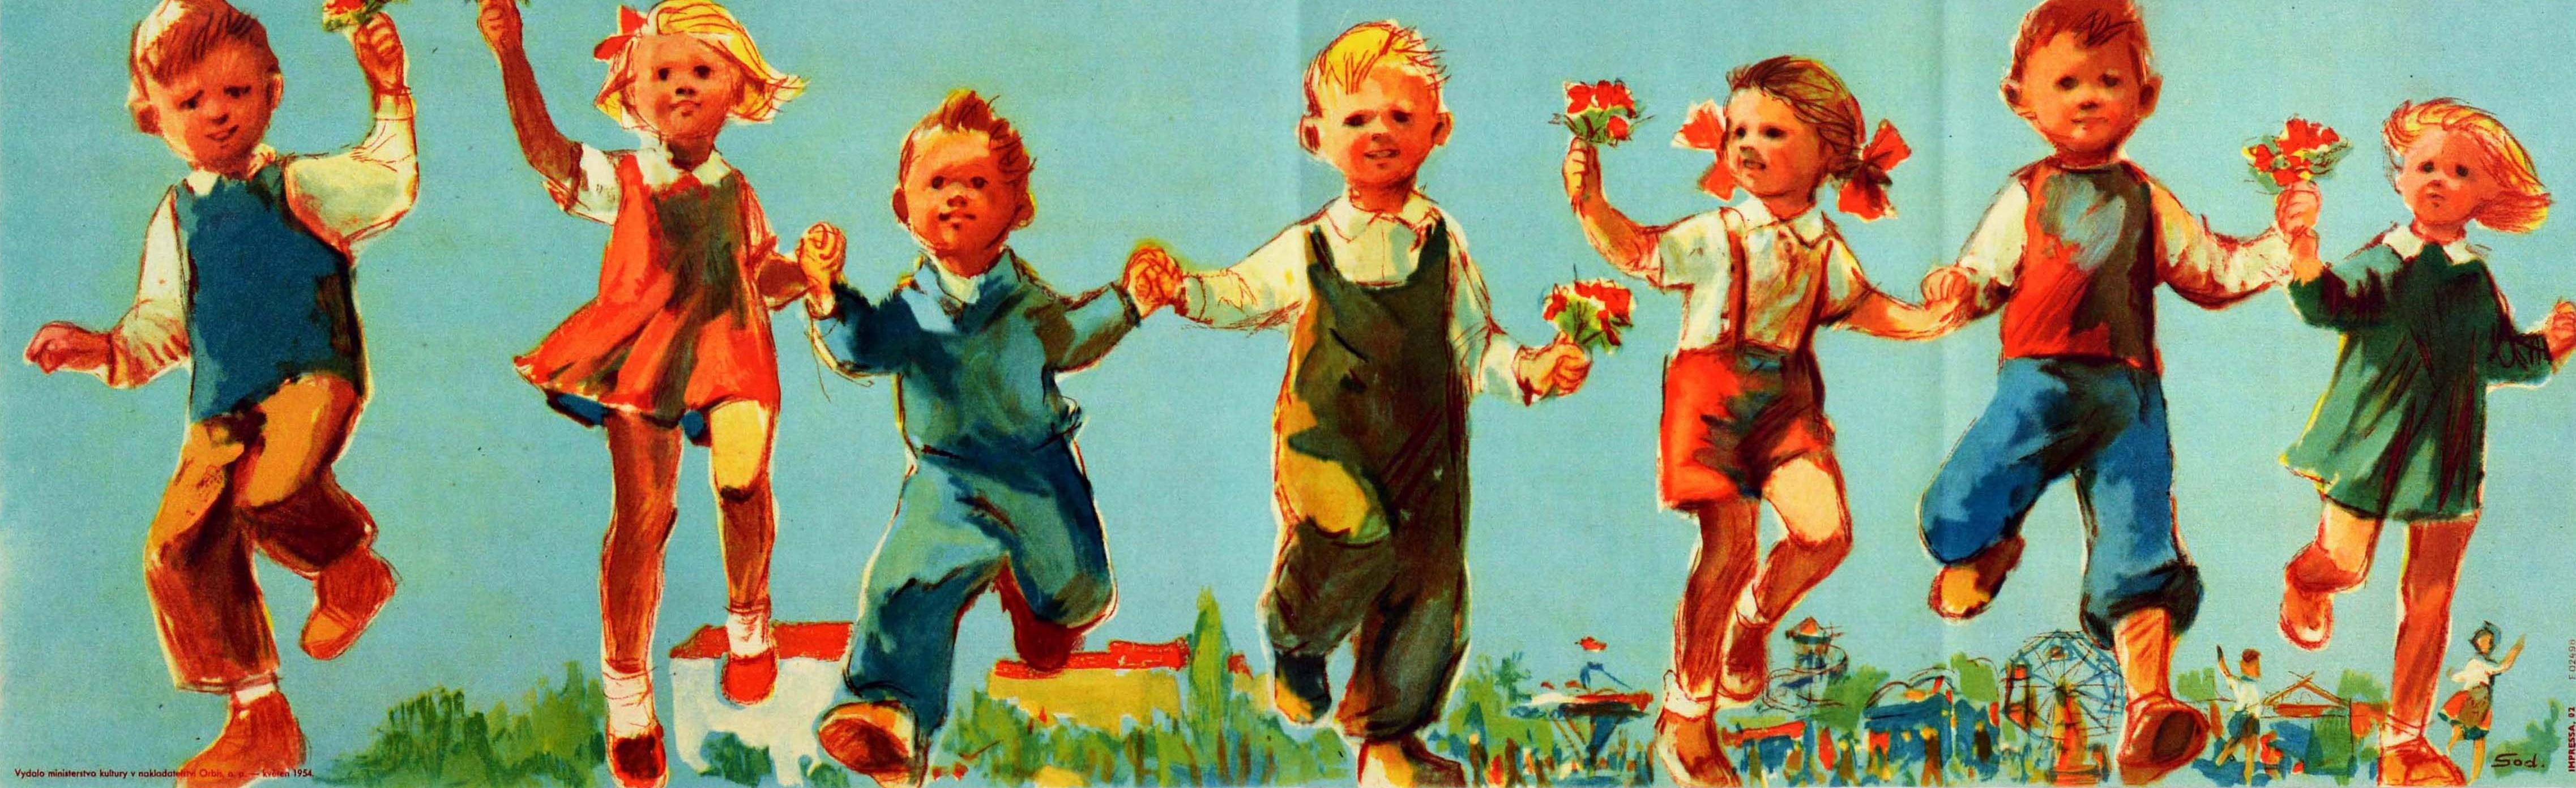 Original vintage propaganda poster commemorating the first International Children's Day / Mezinarodni Den Deti featuring smiling young boys and girls holding flowers and running together in a line towards the viewer, the text against the blue sky